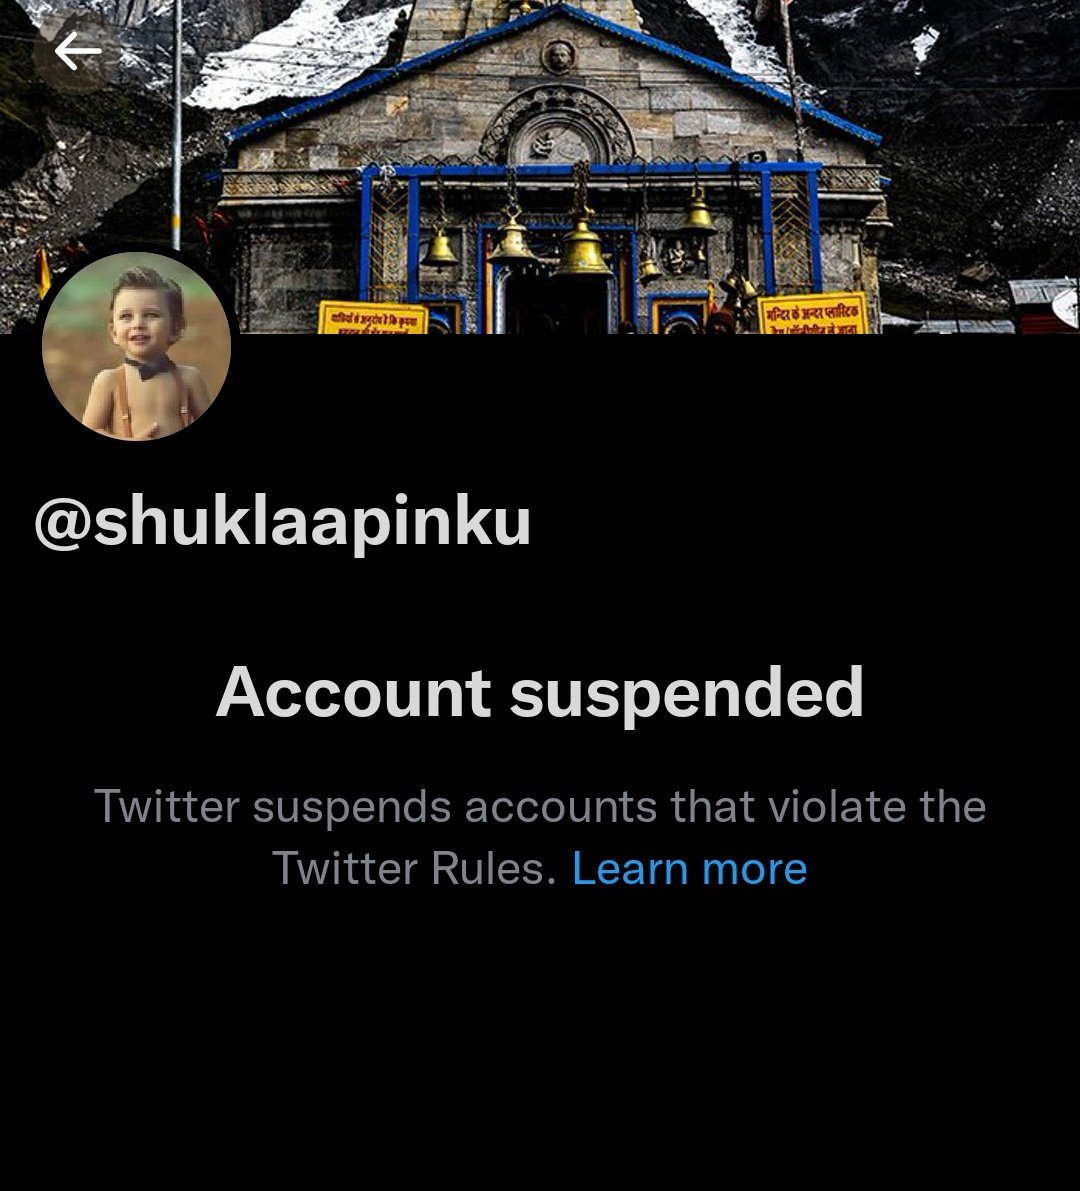 Hello @TwitterIndia! Can you please explain why @shuklaapinku account suspended? What's wrong with you? Bring back him. Freedom of expression should not be one sided.